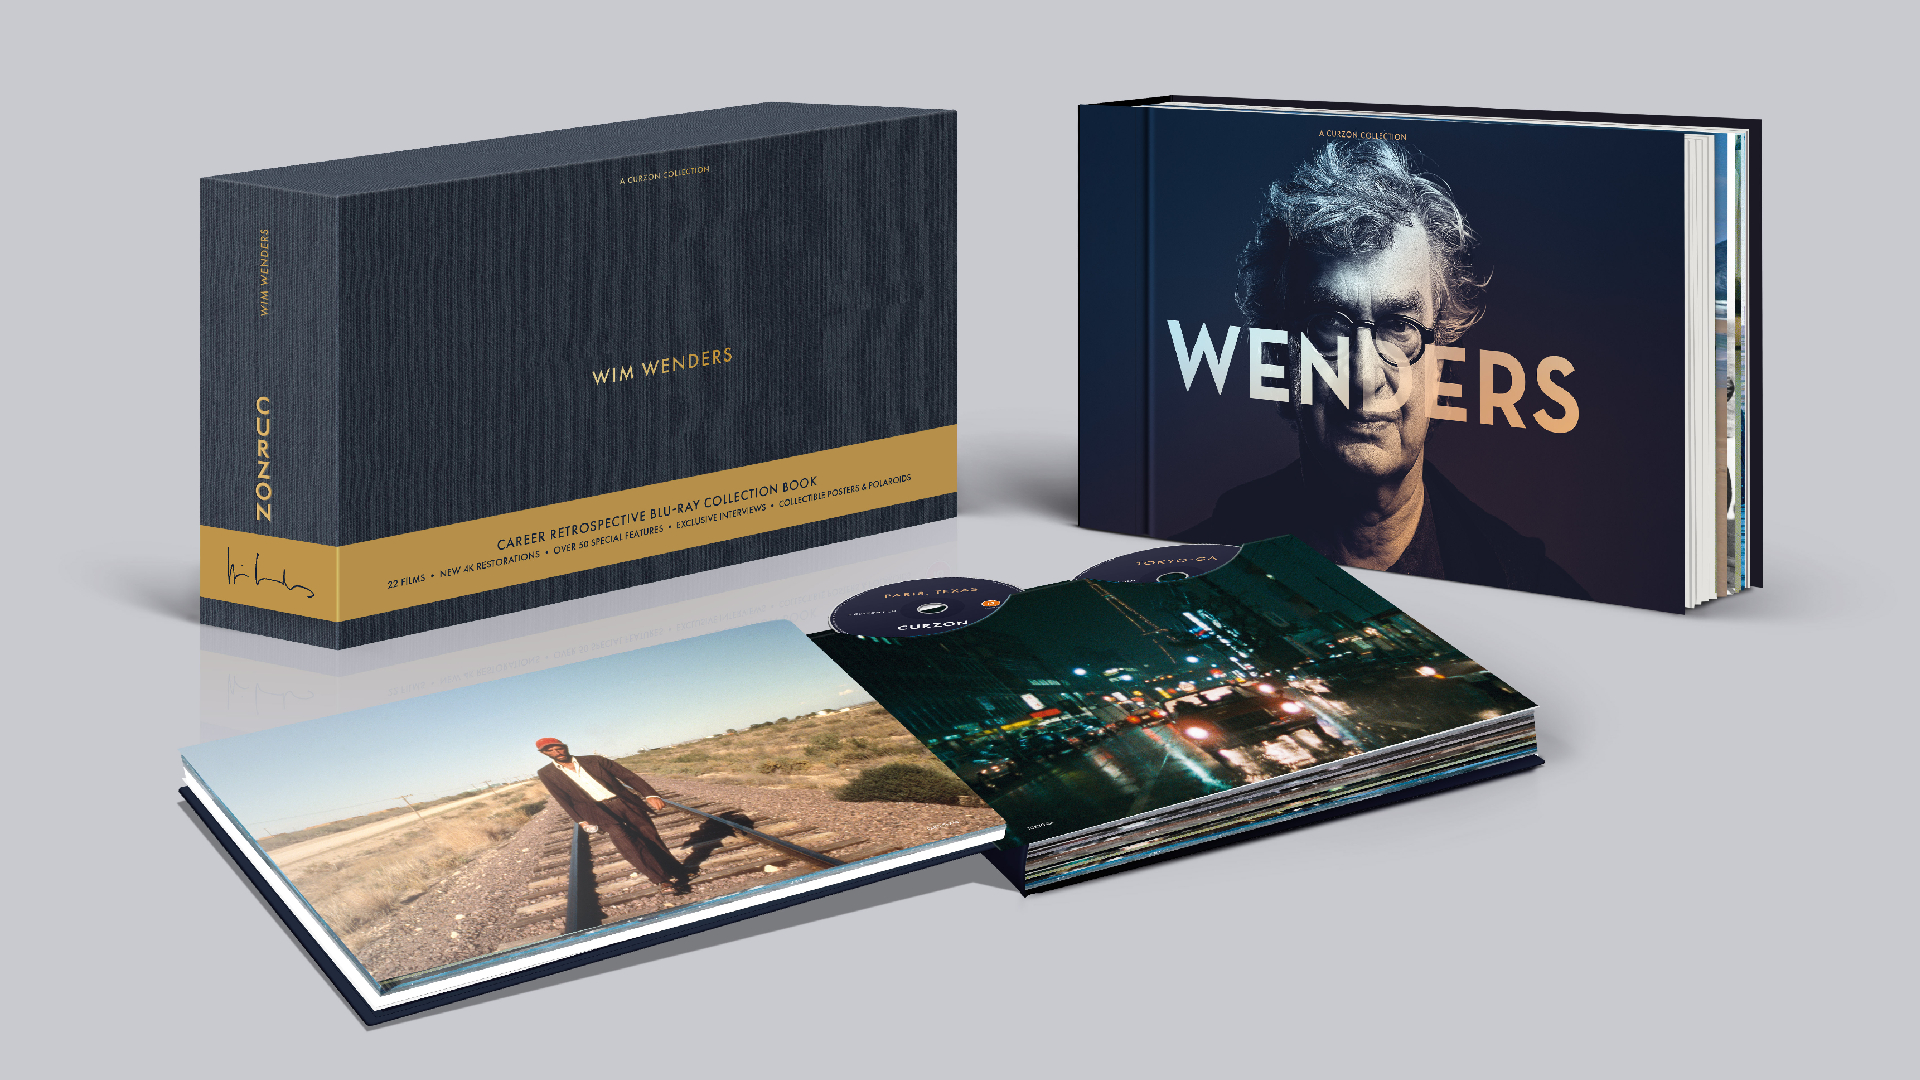 Wim Wenders Collection Blu-ray box set